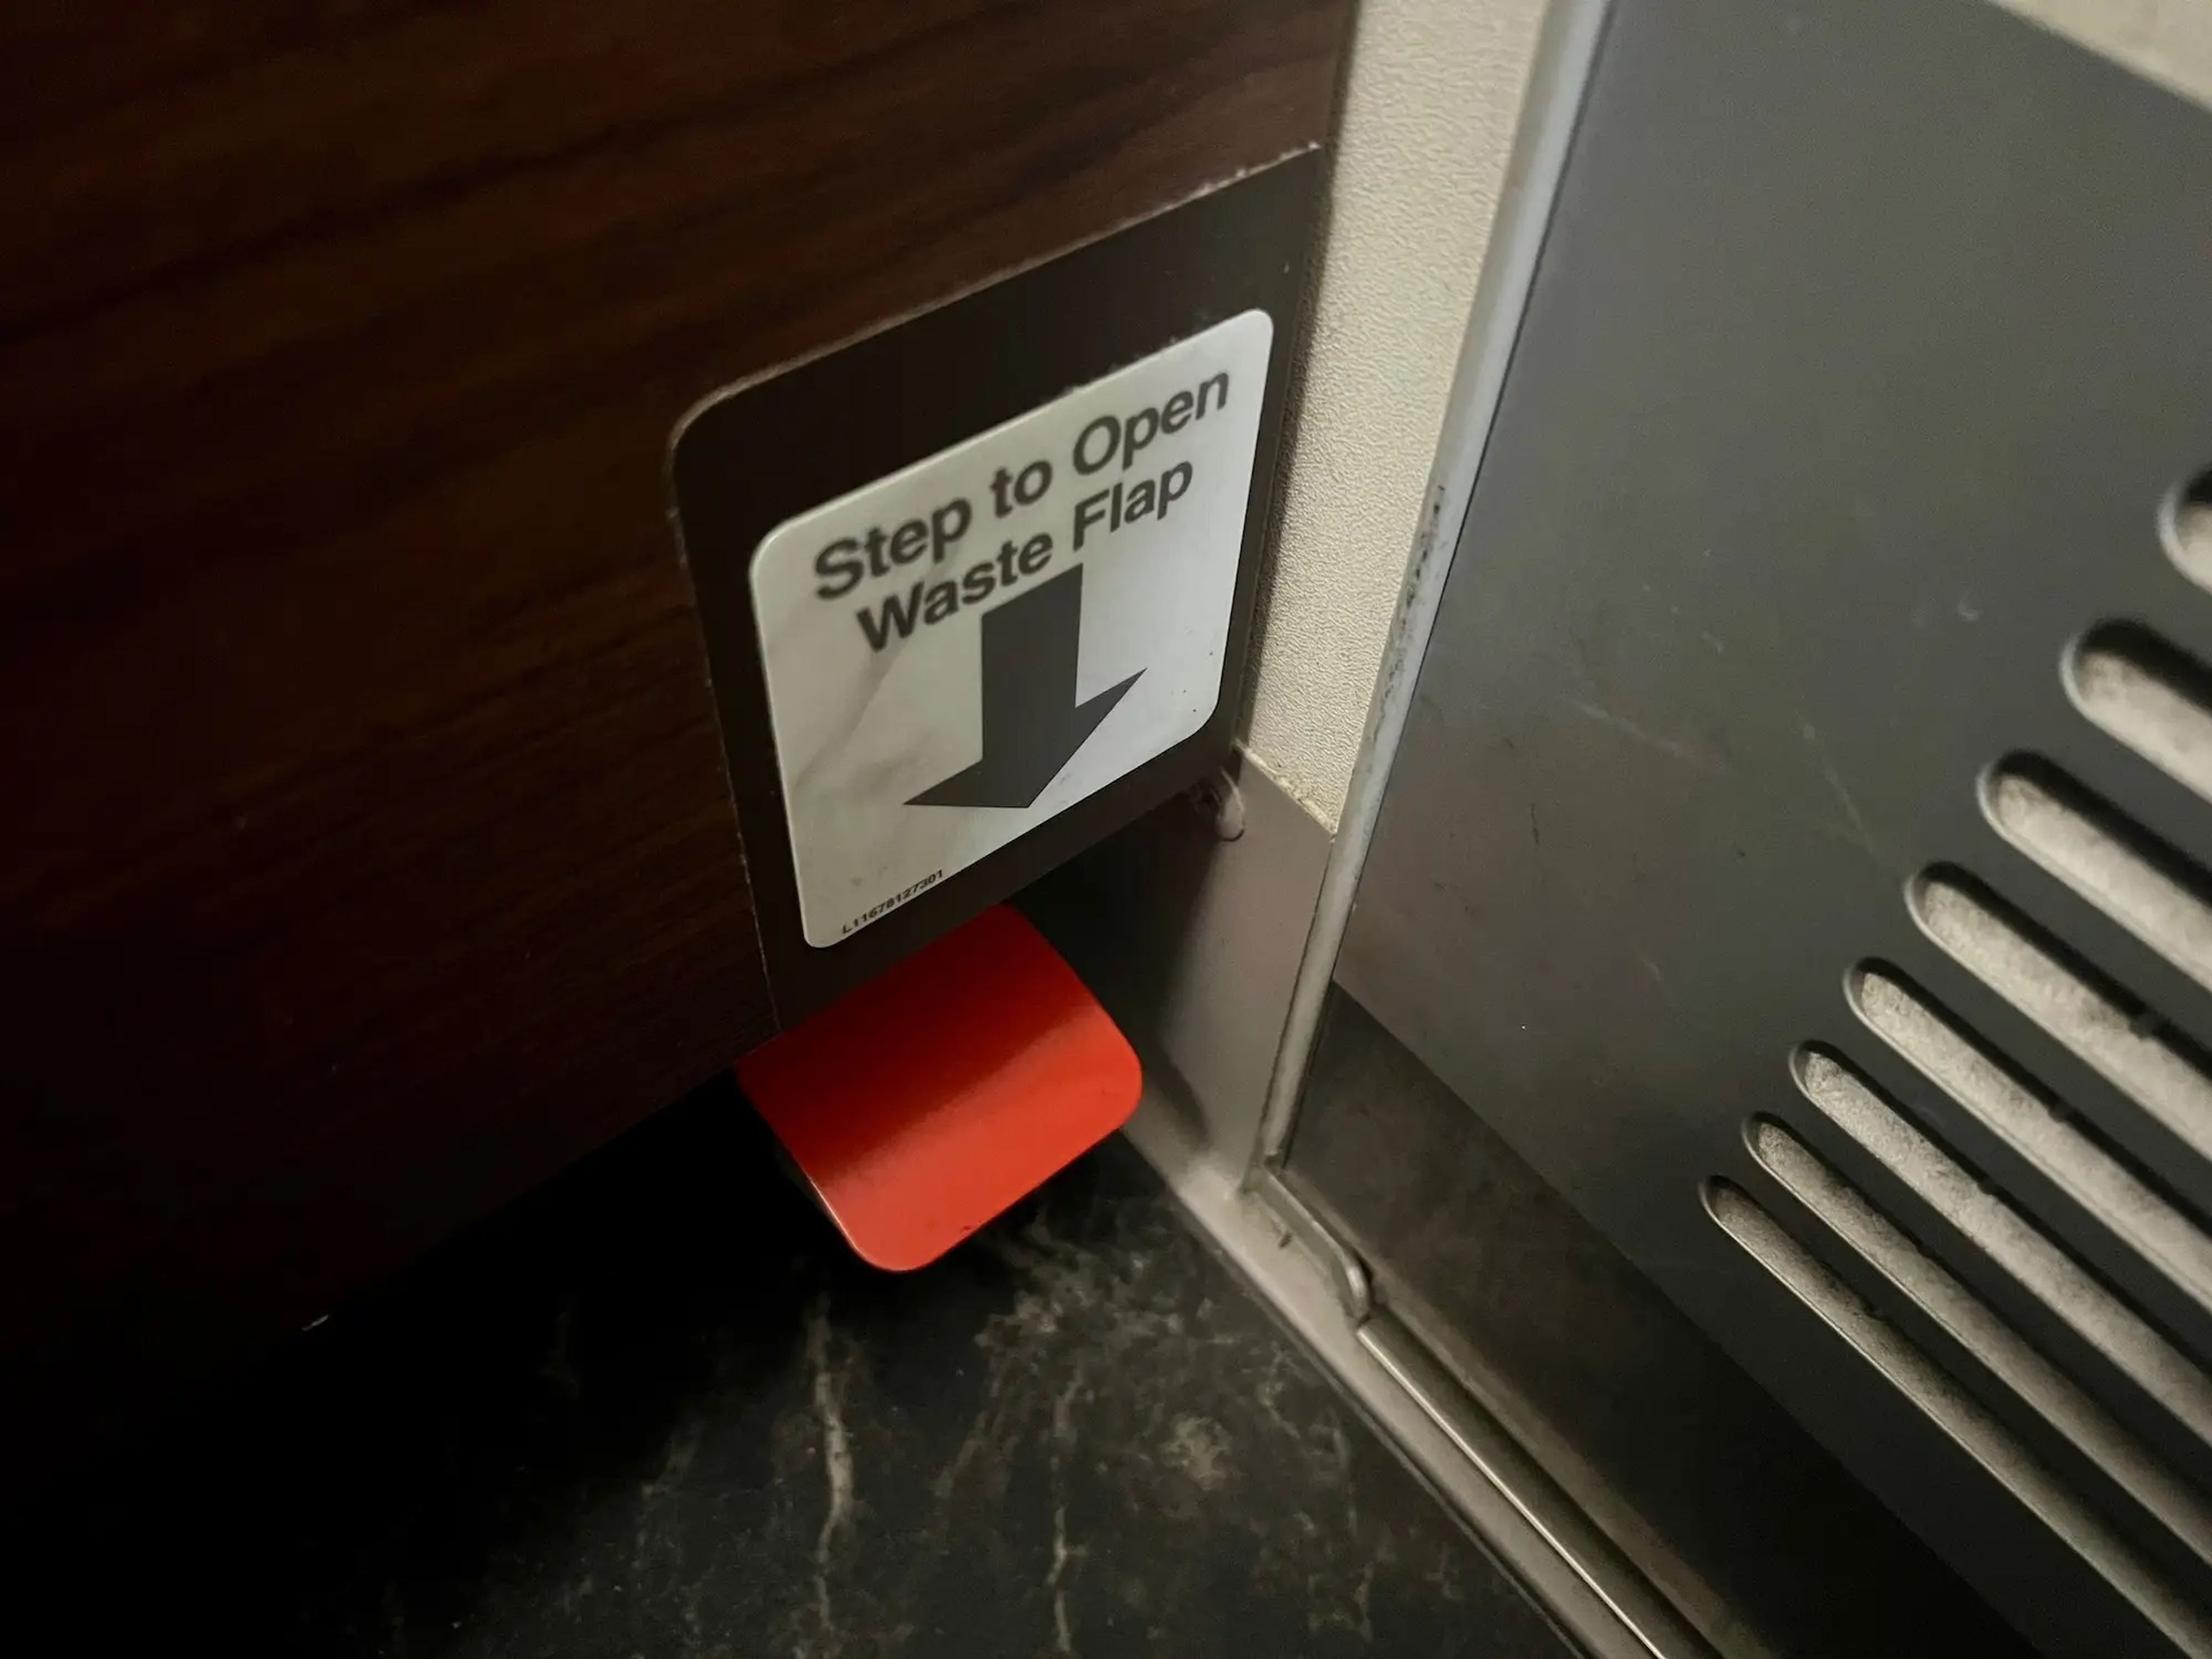 The waste bin step opener in Singapore's A380.